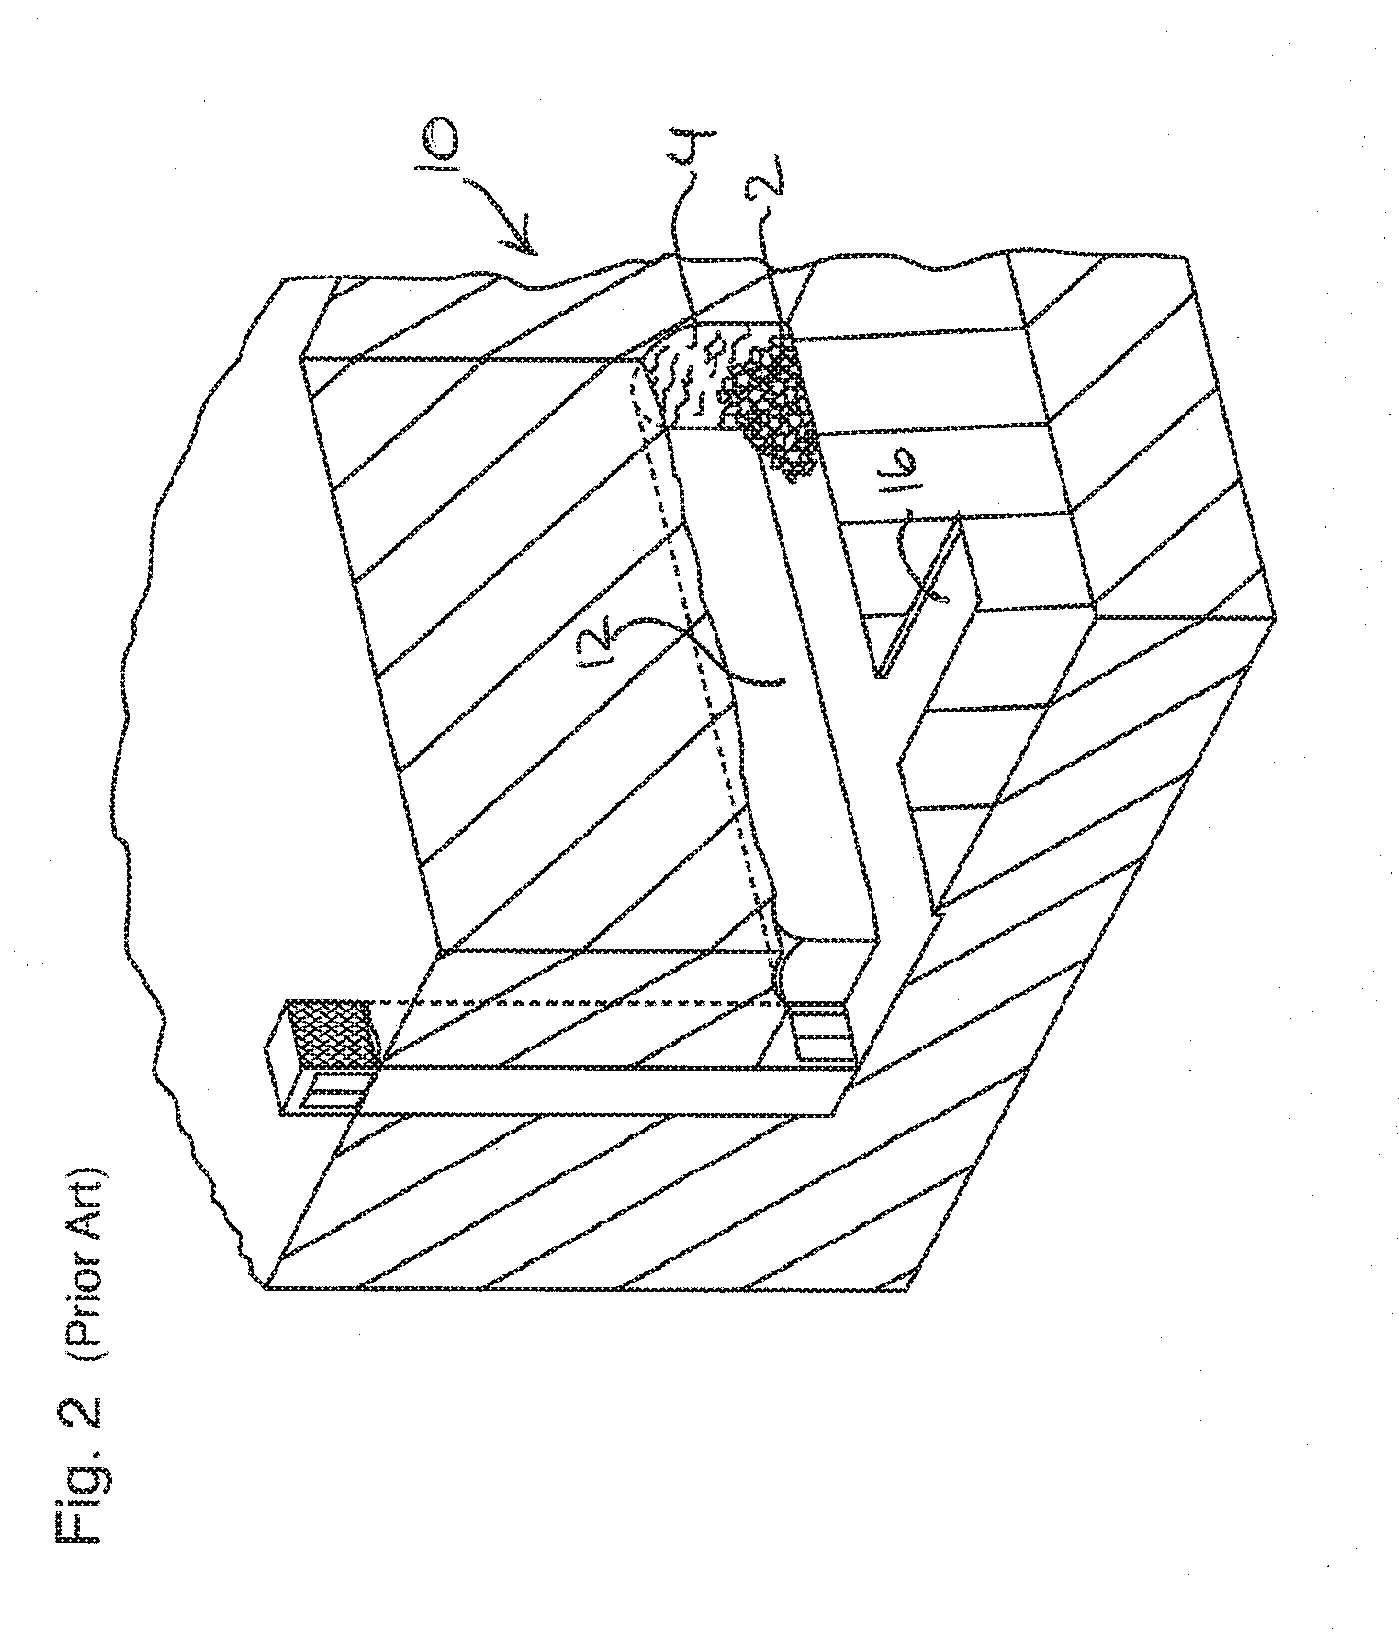 Apparatus, system and method for material extraction in underground hard rock mining